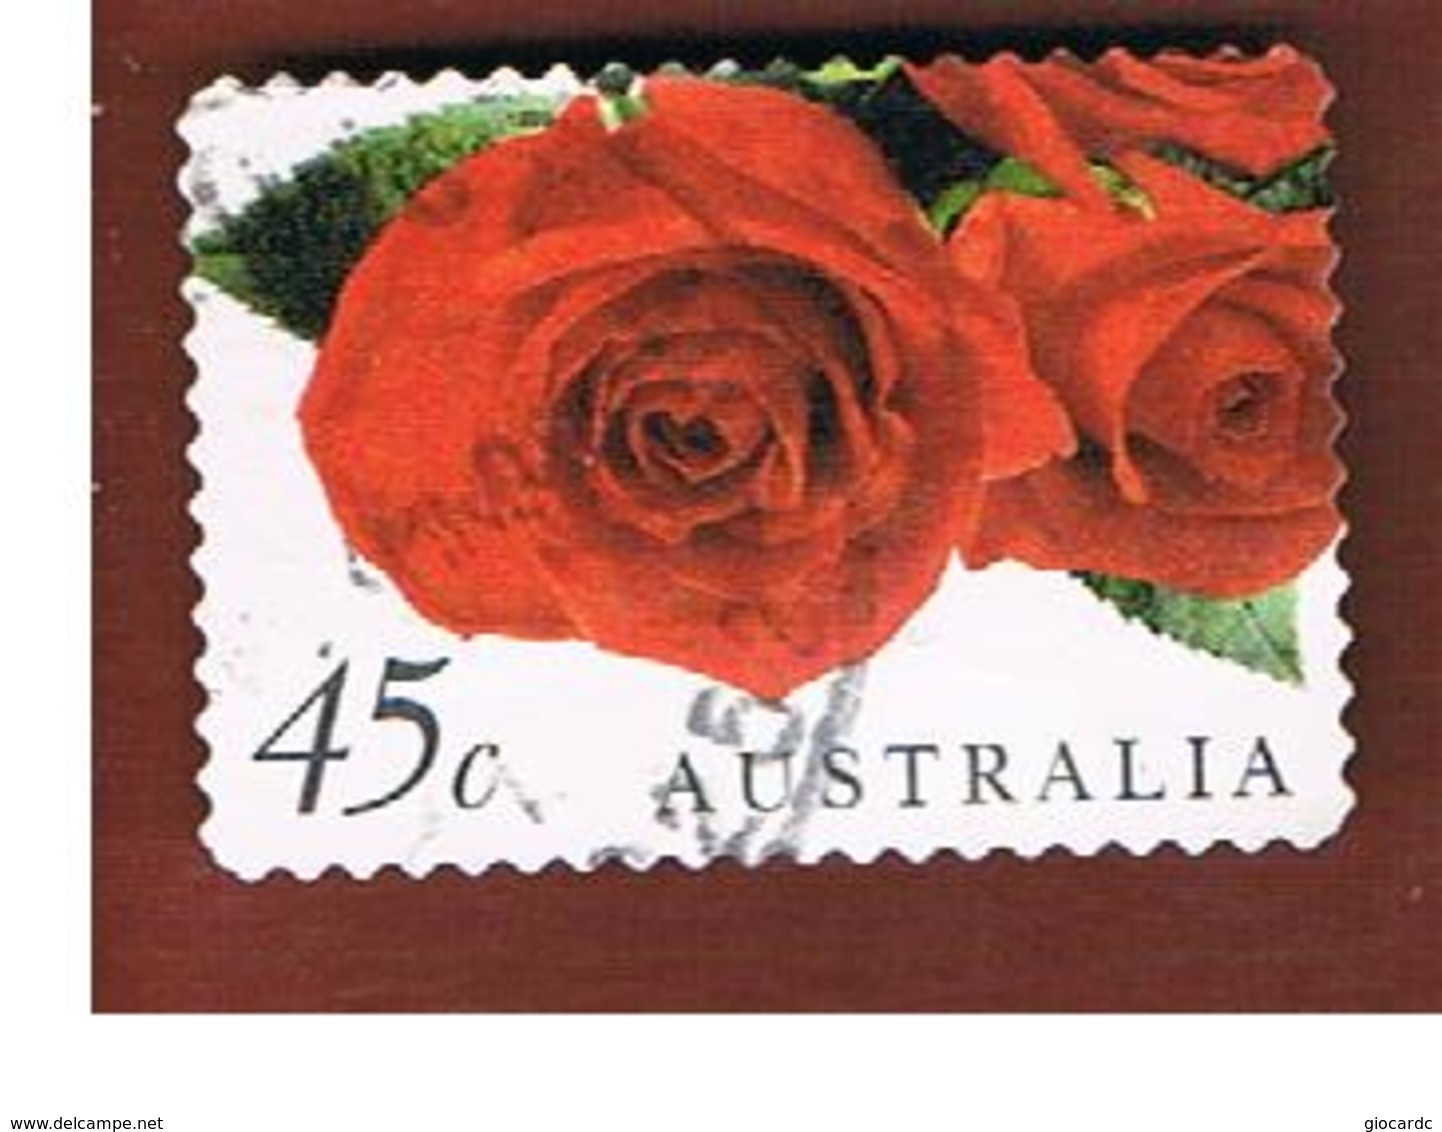 AUSTRALIA  -  SG 1843  -      1999 RED ROSES  -       USED - Used Stamps